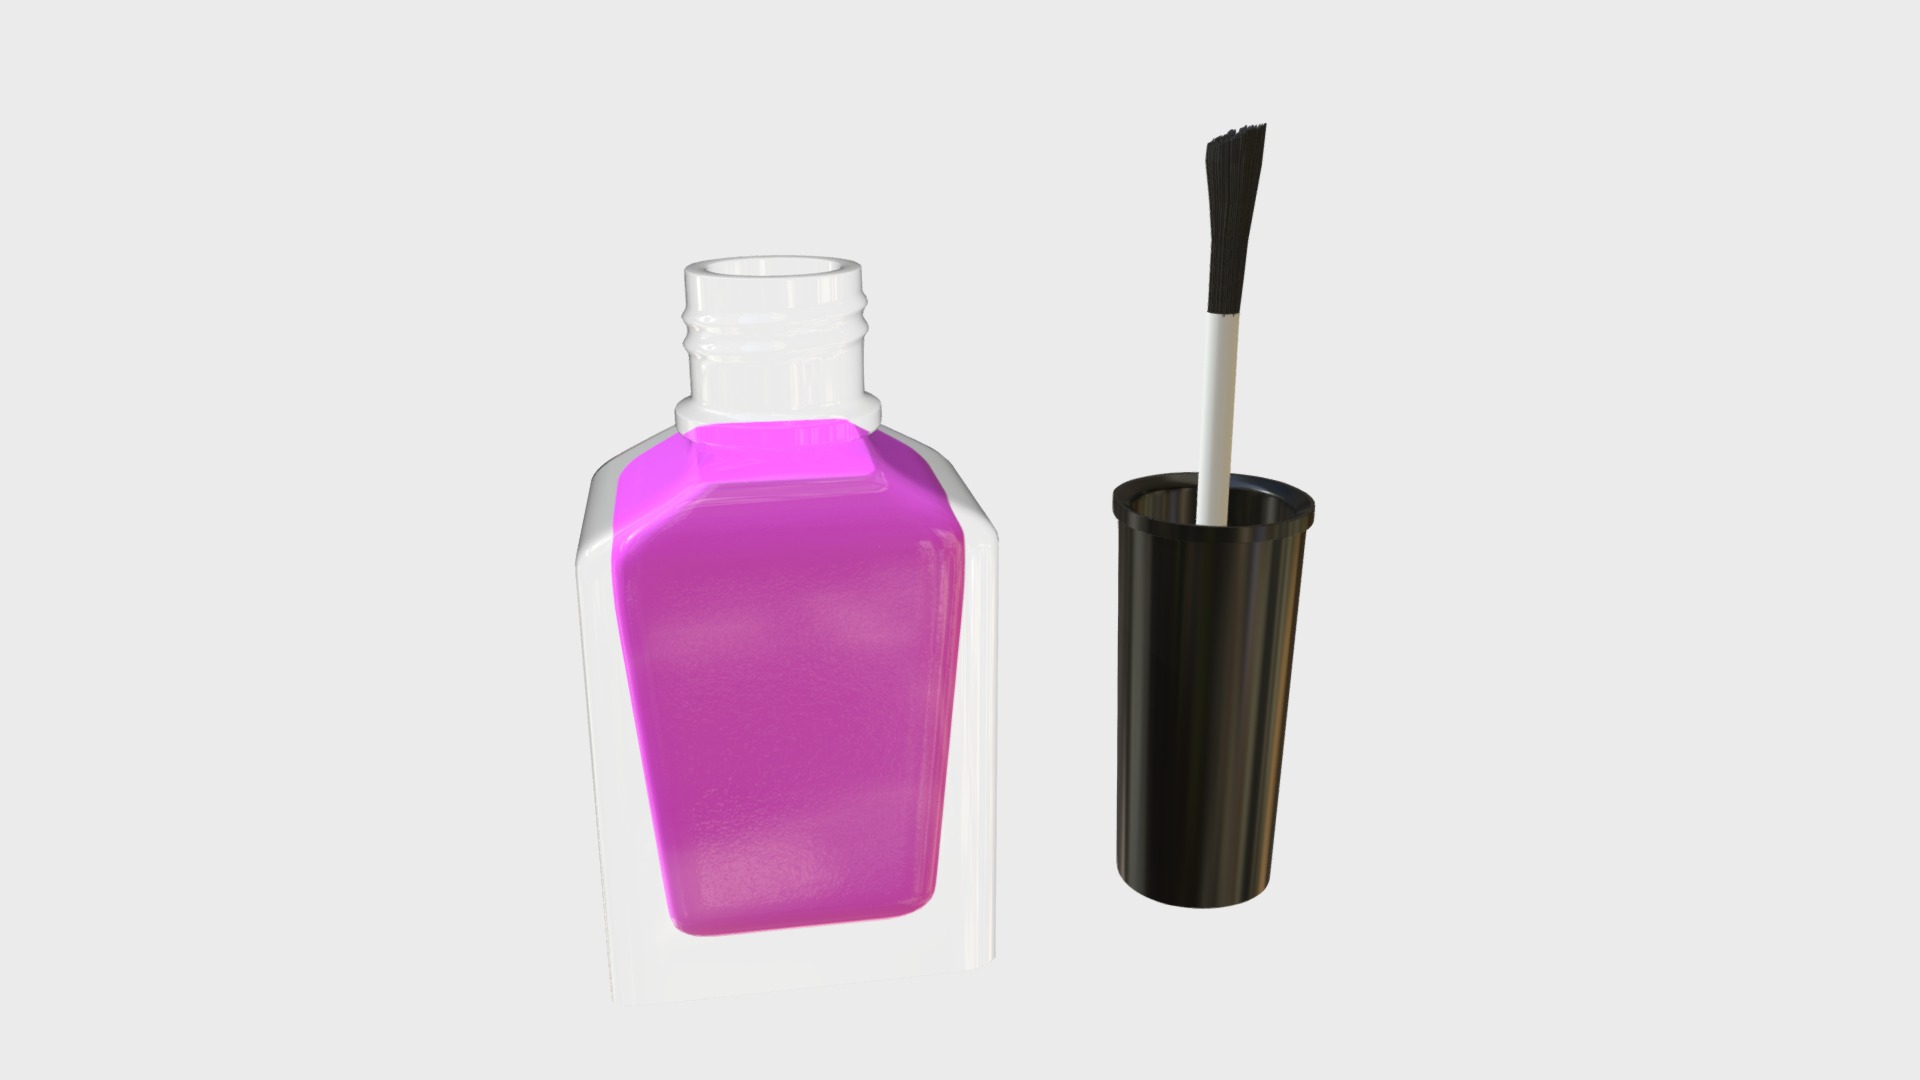 3D model Open nail polish - This is a 3D model of the Open nail polish. The 3D model is about a pink bottle with a black cap.